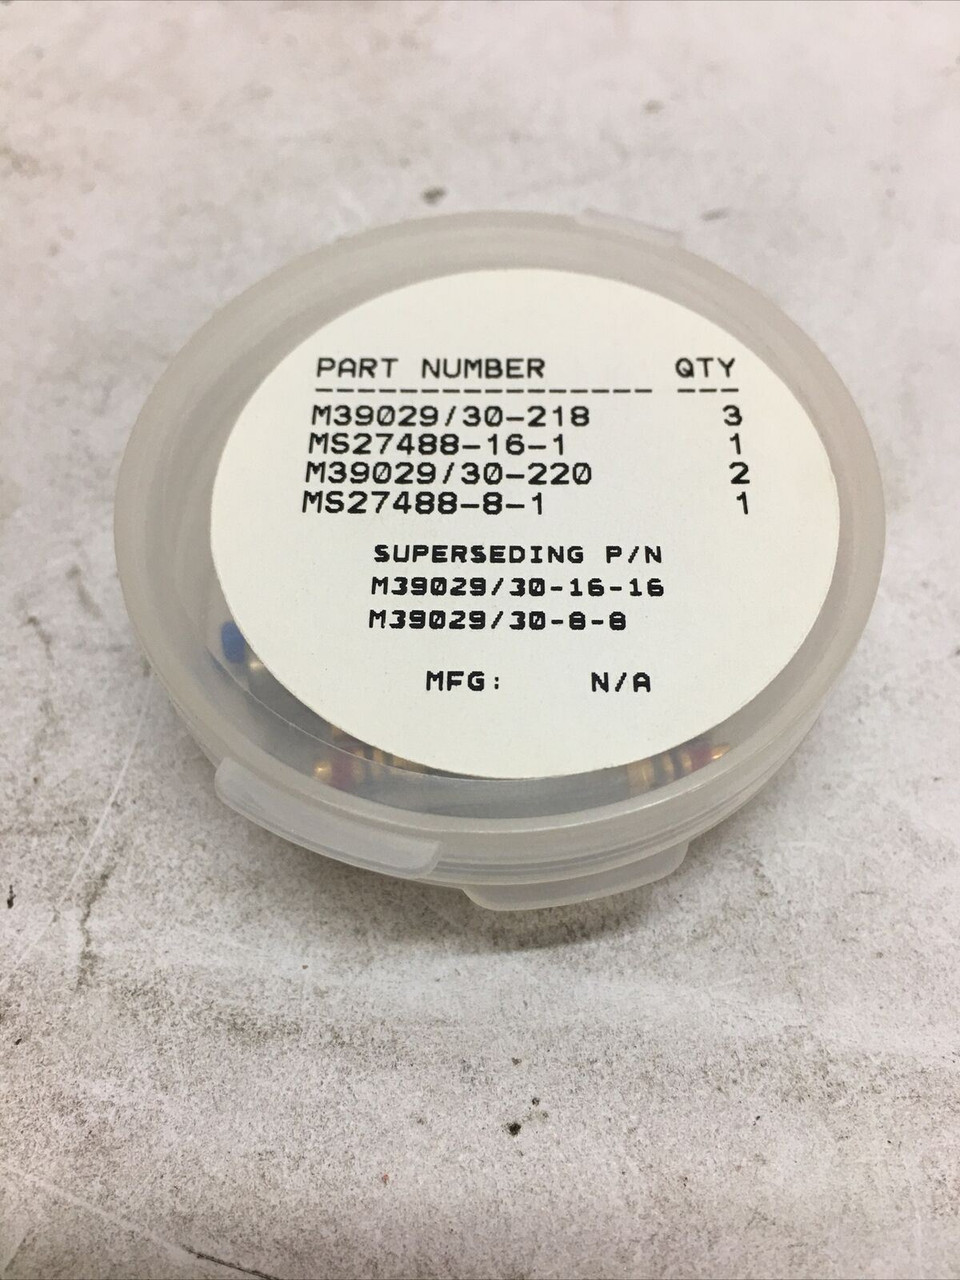 Military SpecificationM39029/30-220 Electrical Contacts